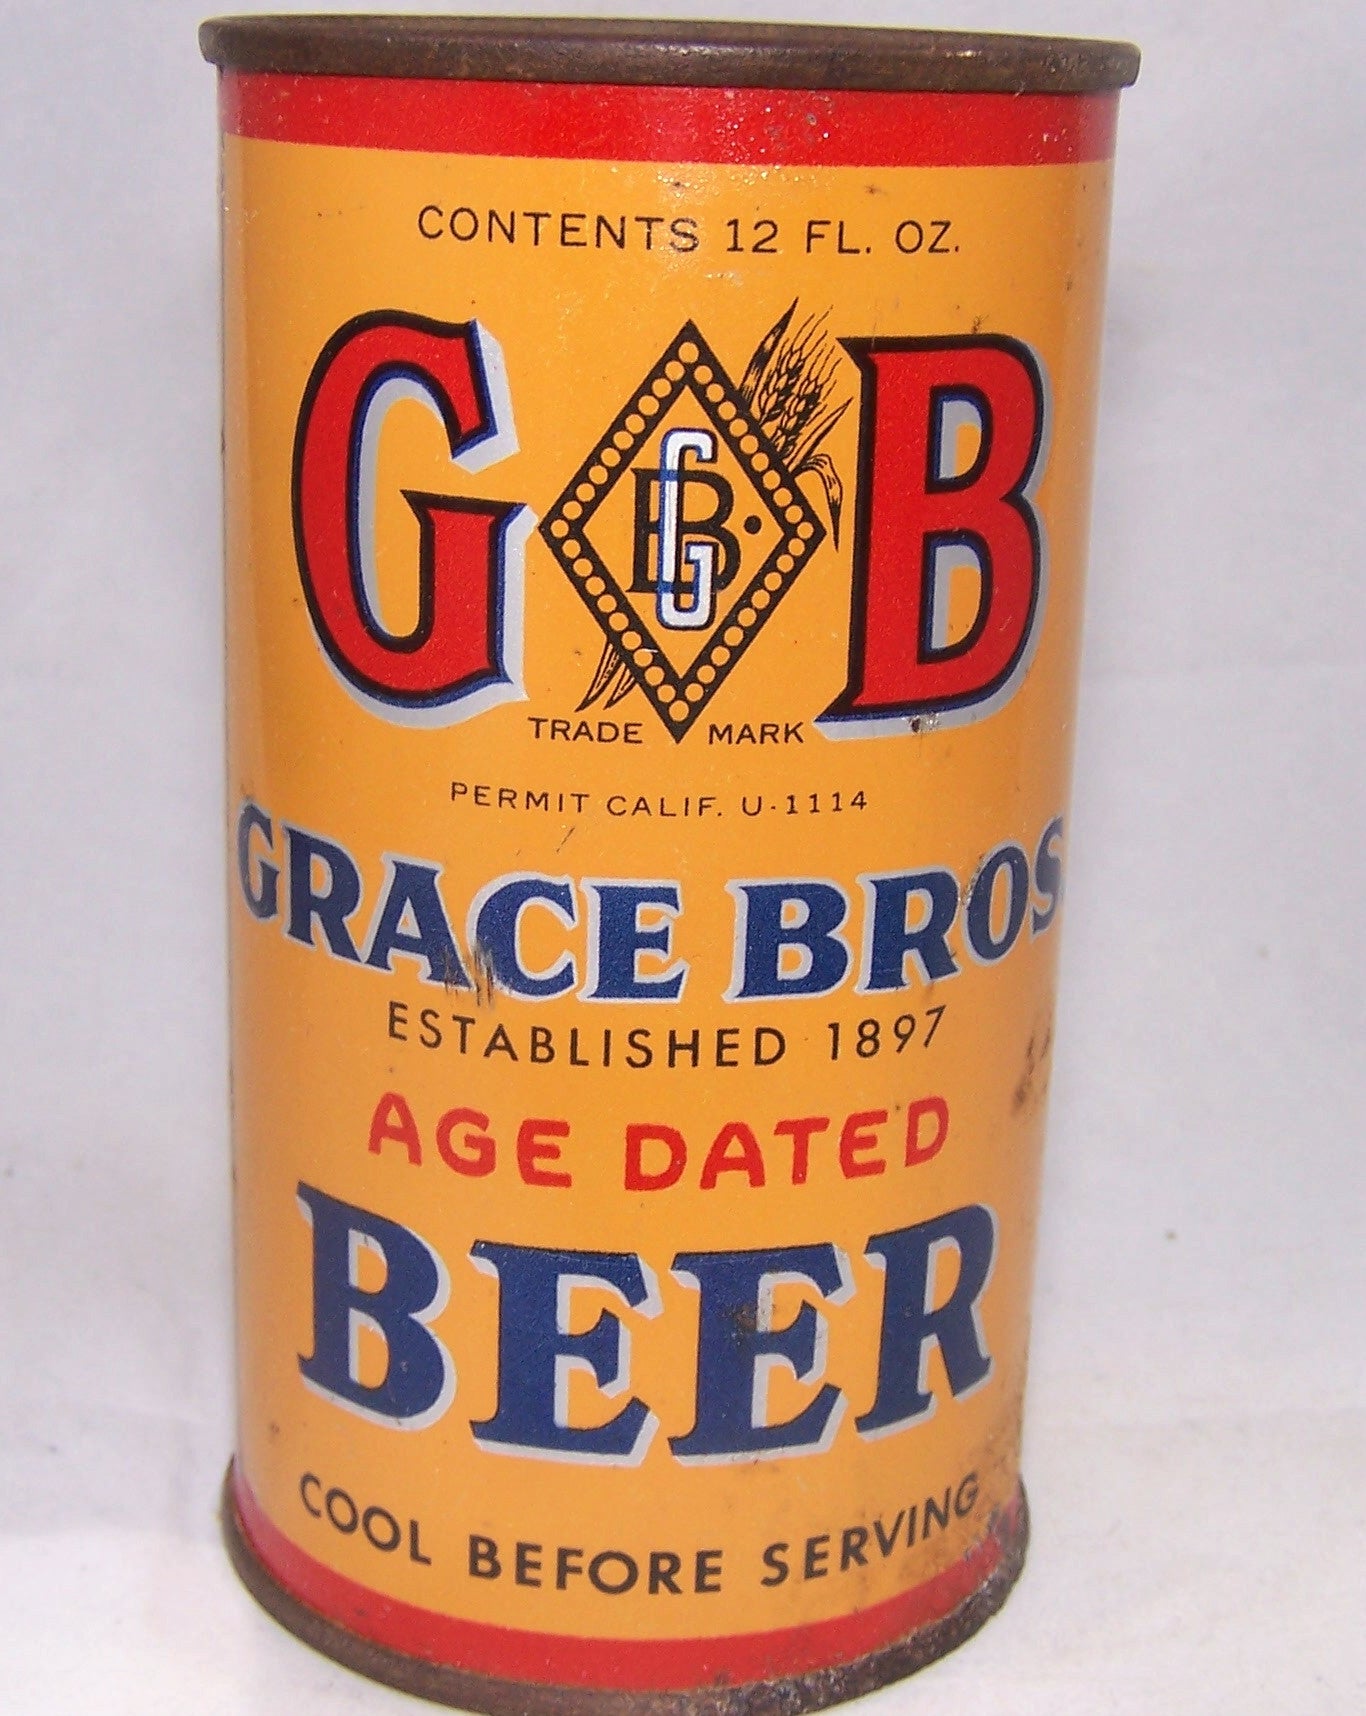 Grace Bros Age Dated Beer, Lilek # 313 Grade 1- Sold on 10/24/16